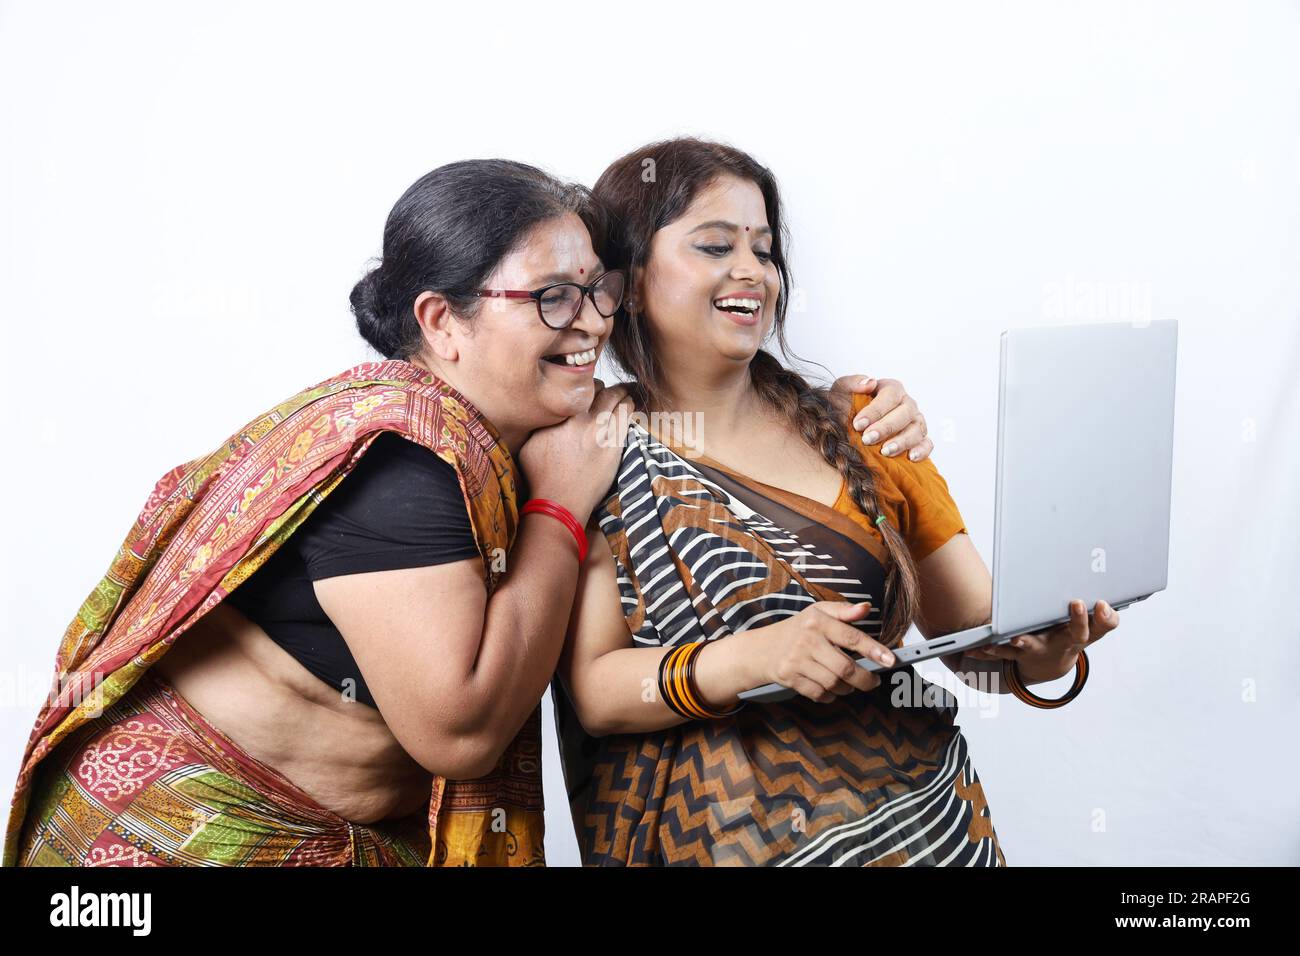 Rural Indian happy women holding laptop as digitalization concept. Internet reaching every village in India. Women empowerment. Rural education. Stock Photo